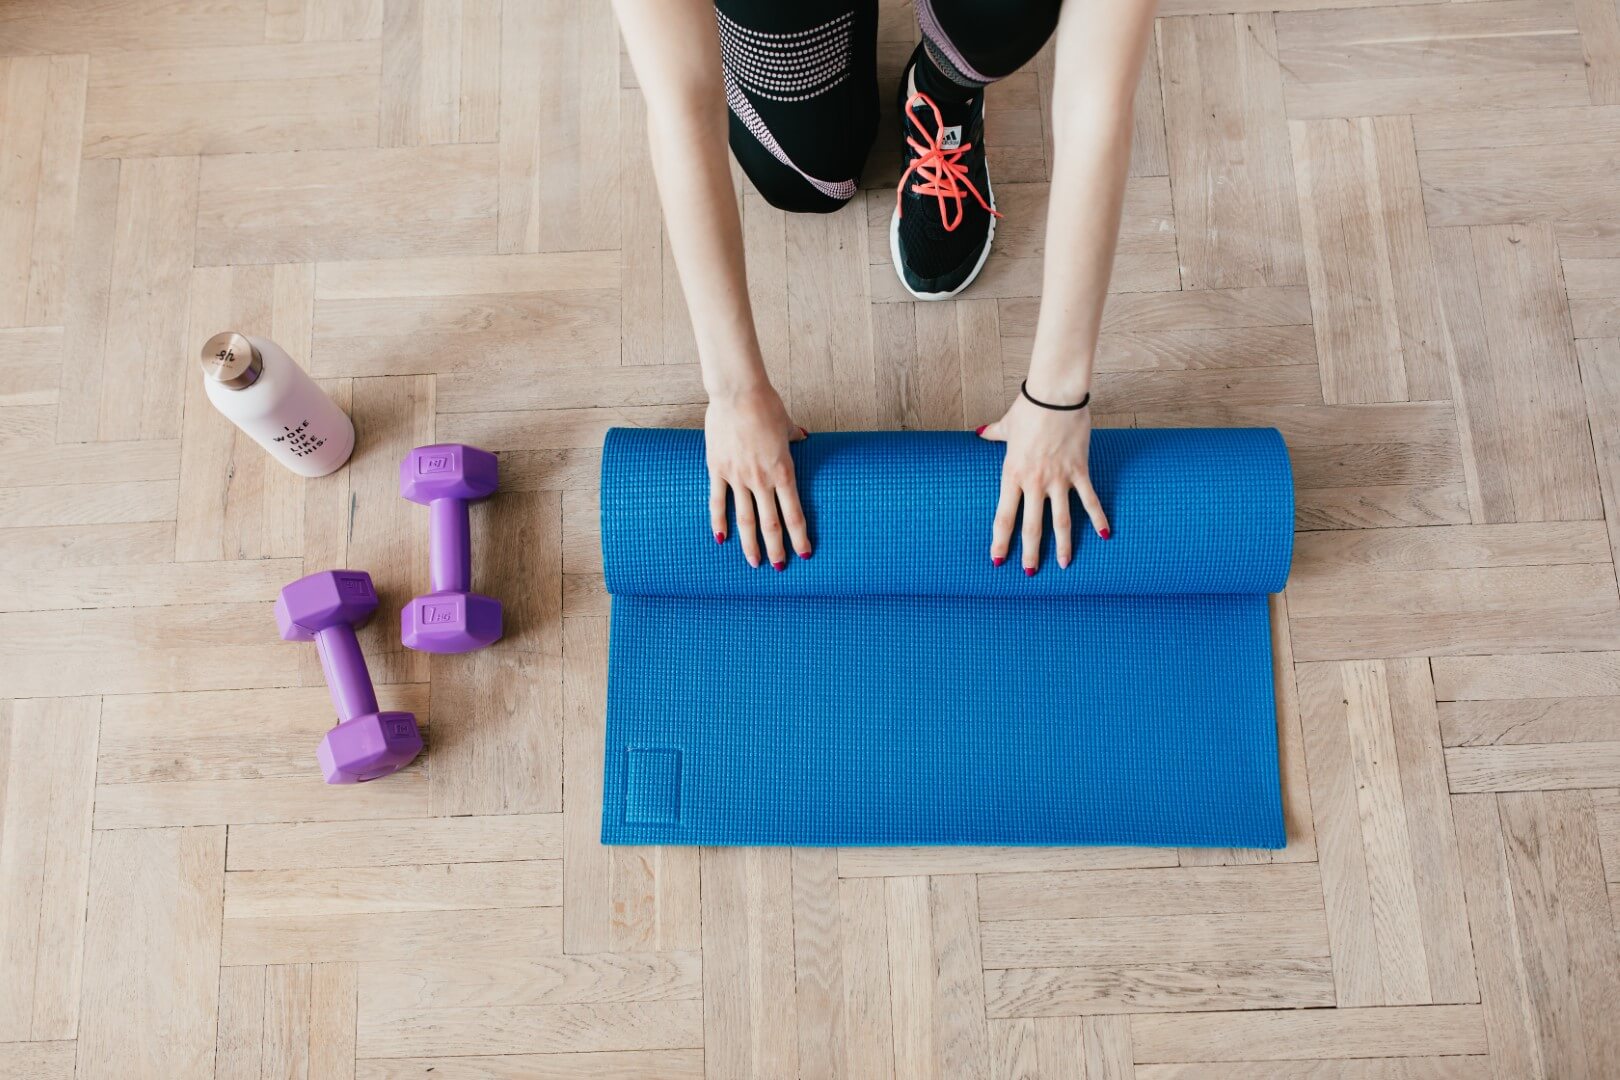 5 Home Exercise Tips to Say Hello to Your Summer-Ready Body